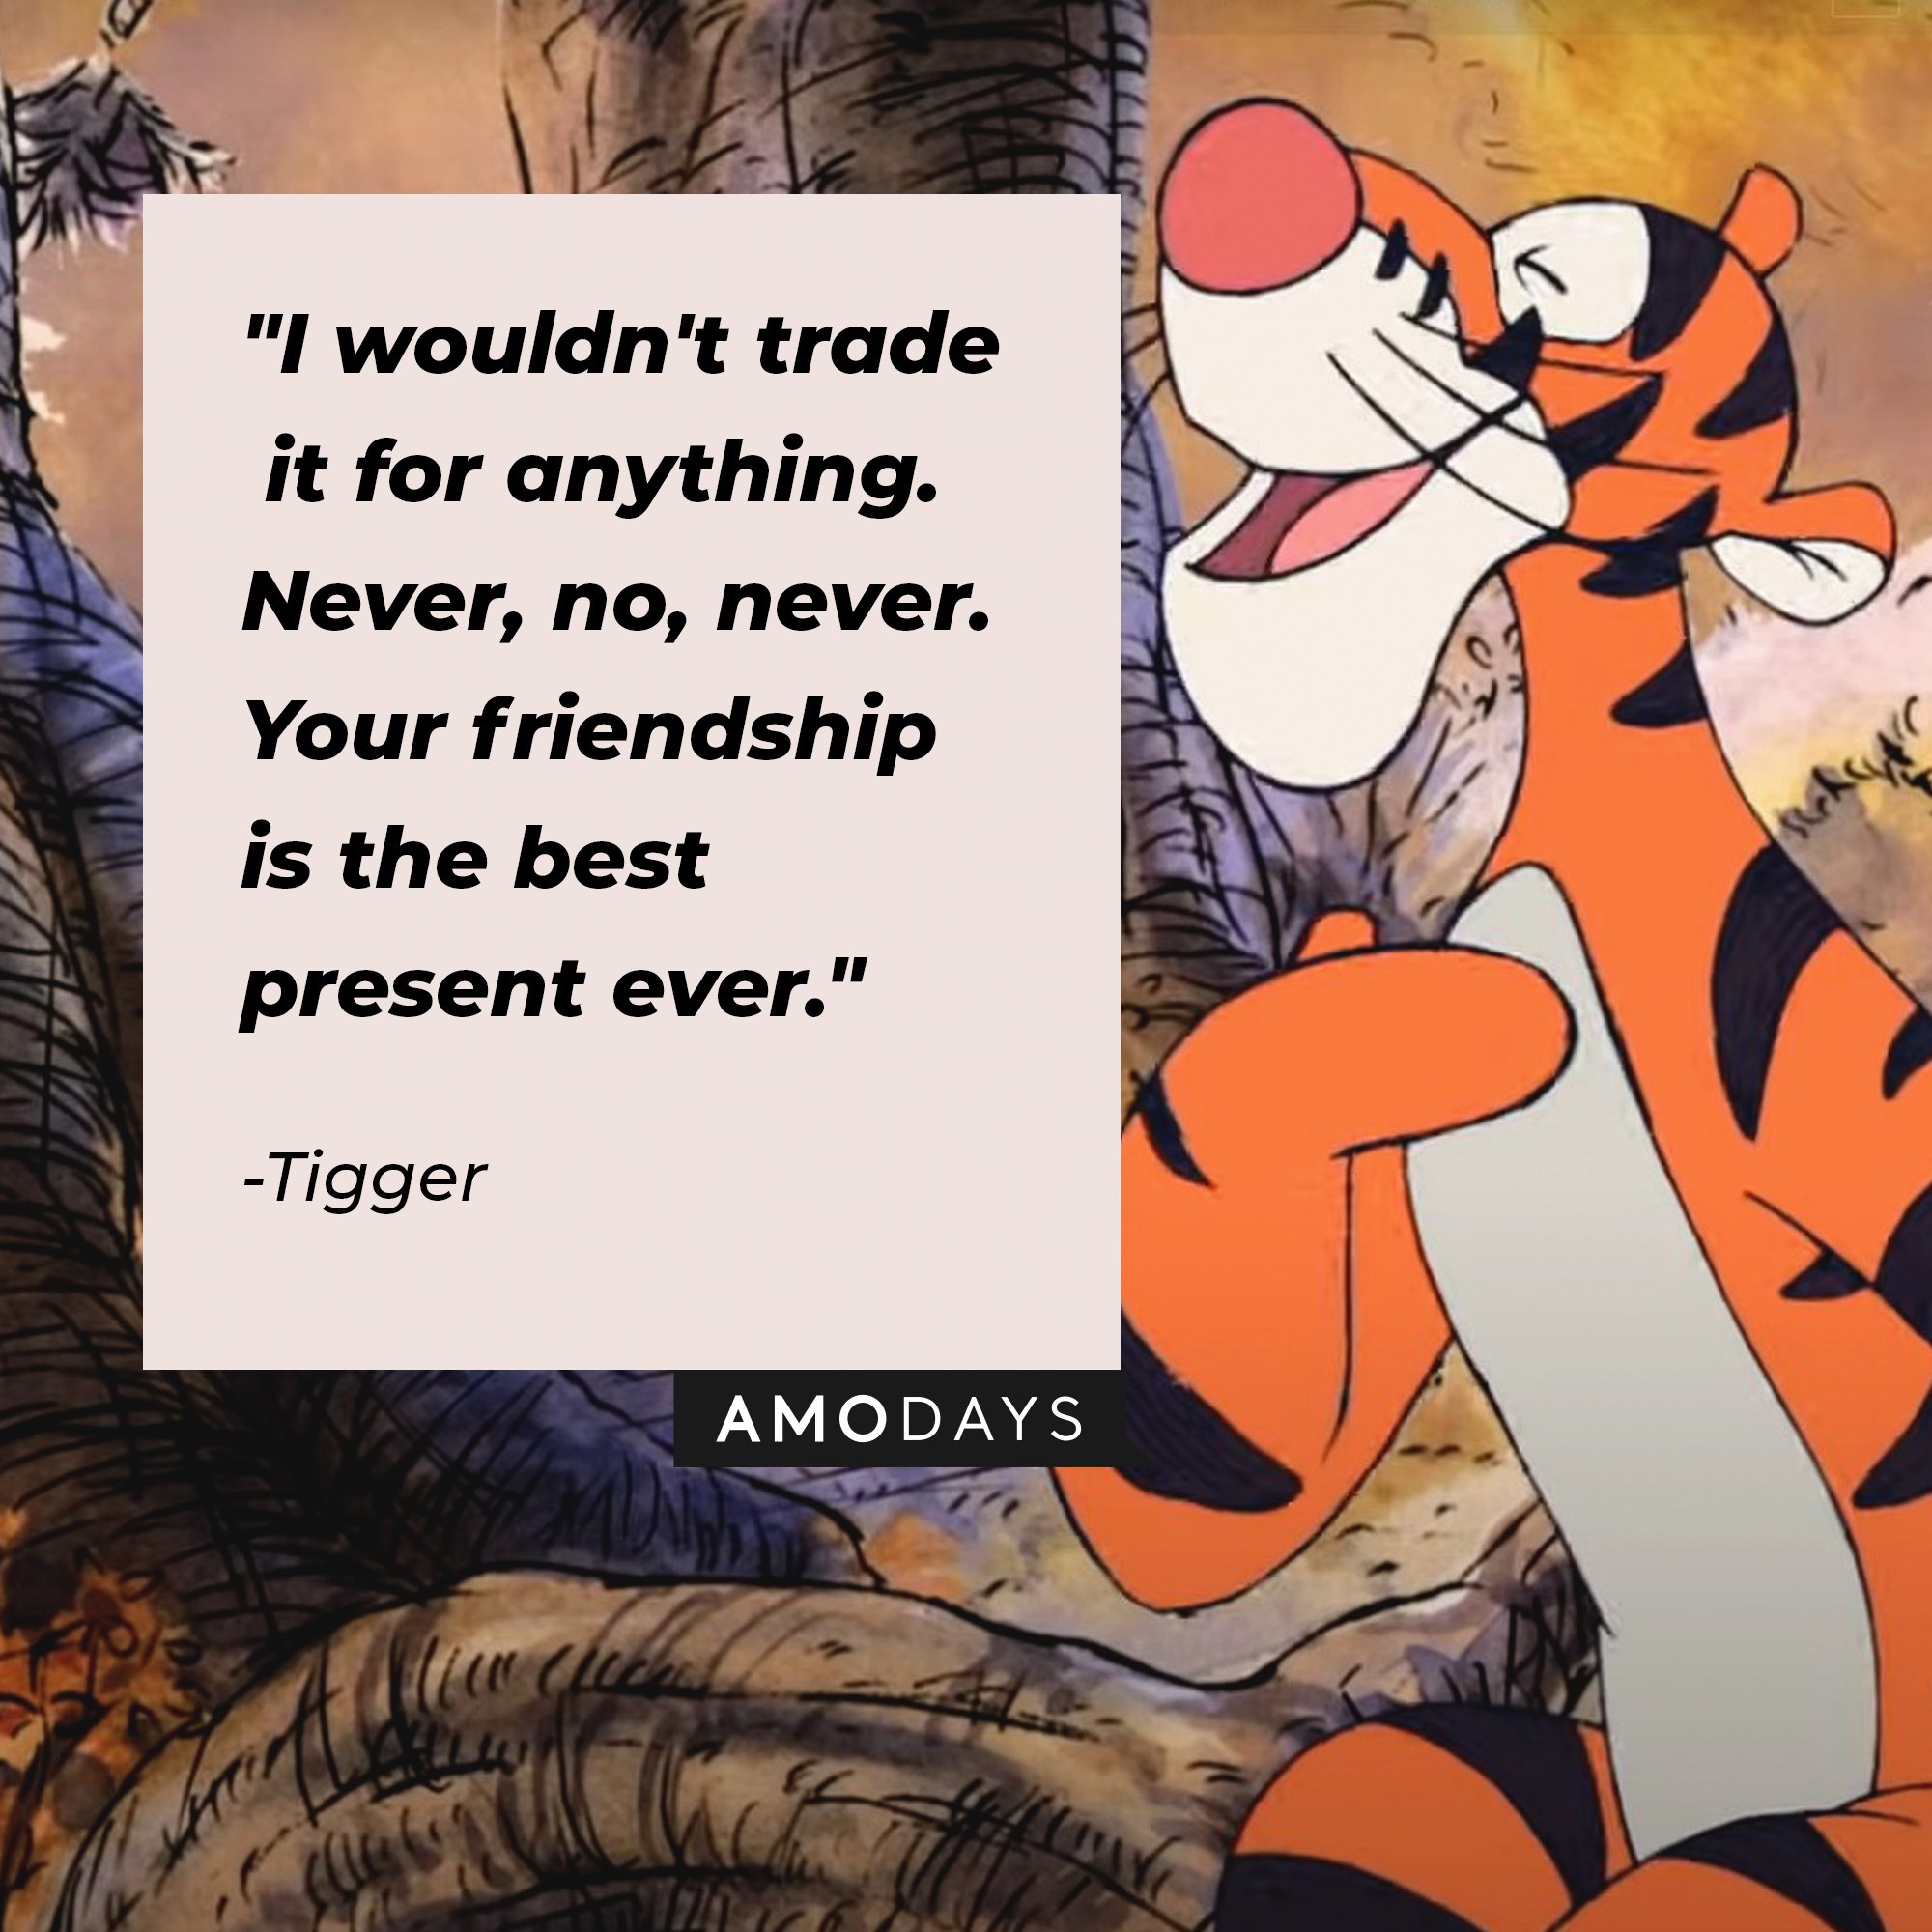 Tigger's quote: "I wouldn't trade it for anything. Never, no, never. Your friendship is the best present ever." | Image: AmoDays